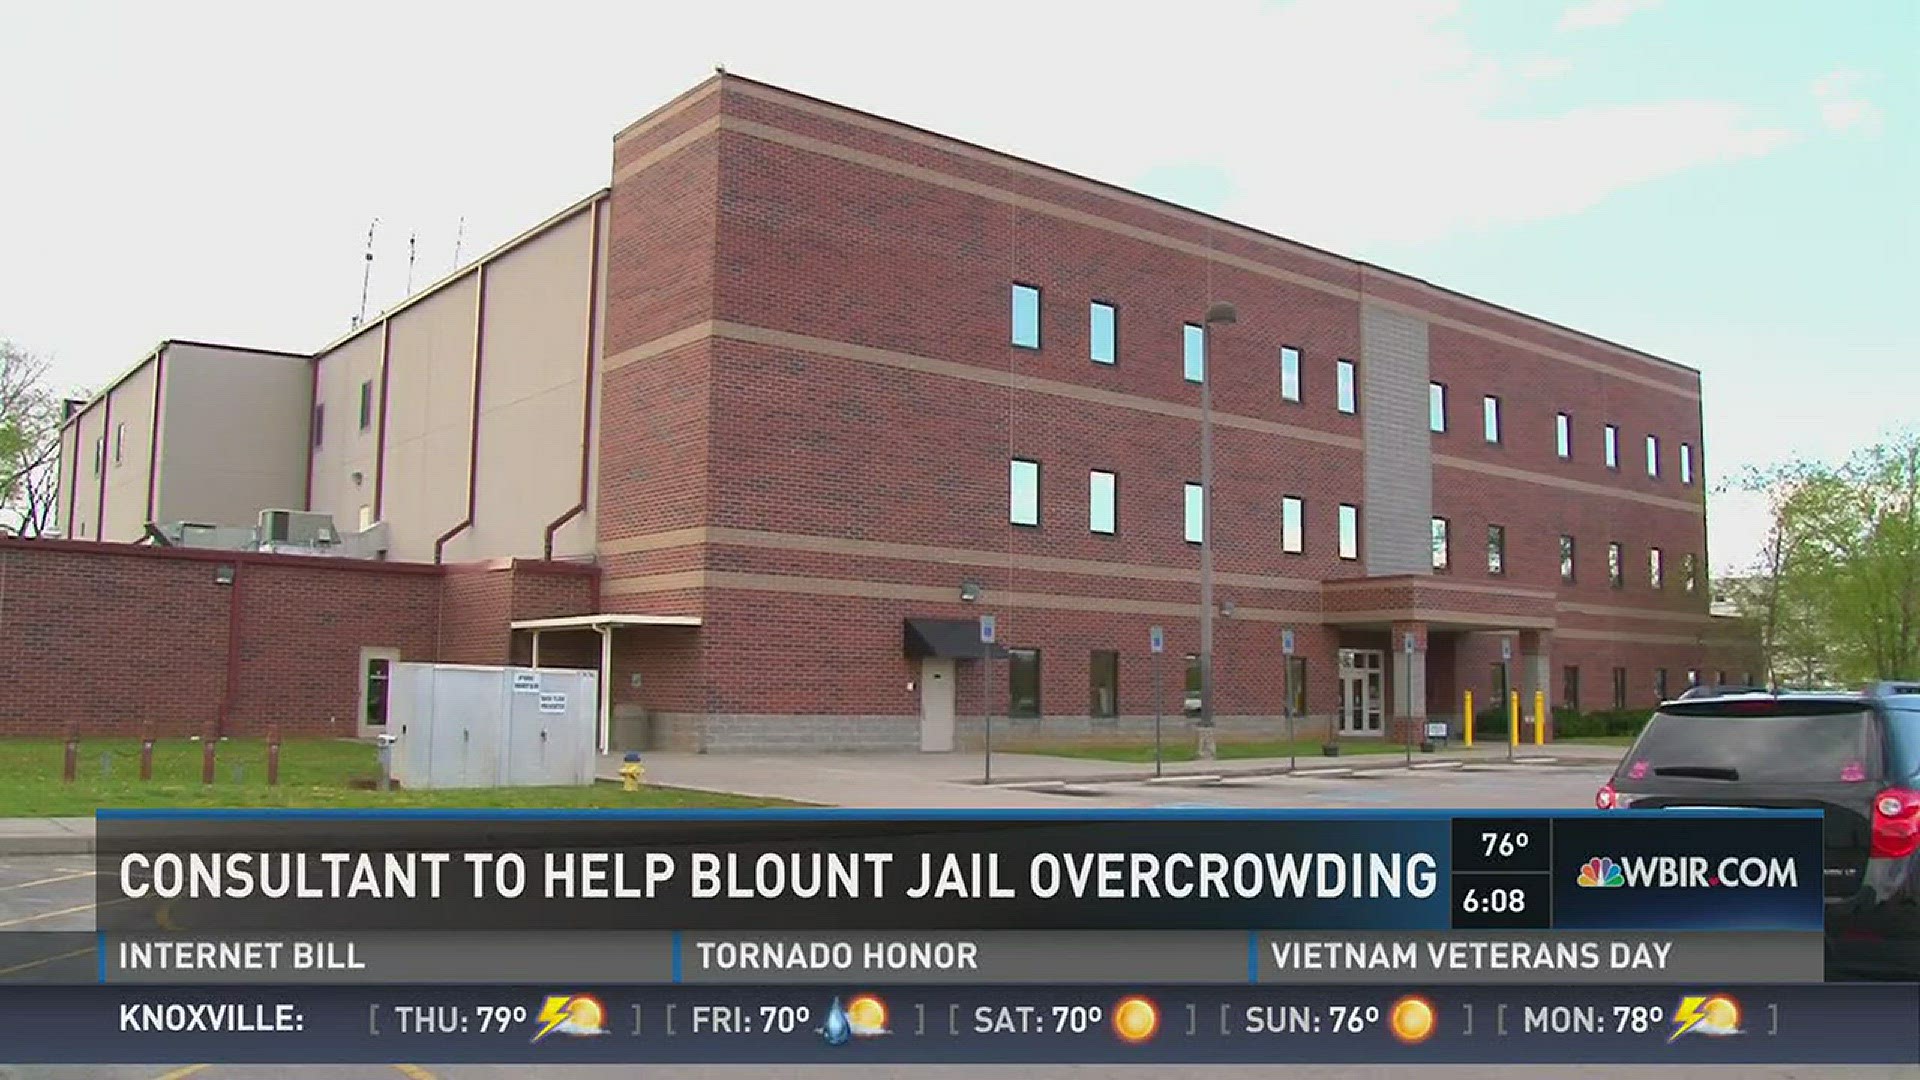 March 29, 2017: A consultant has been selected to help Blount County address jail overcrowding issues.